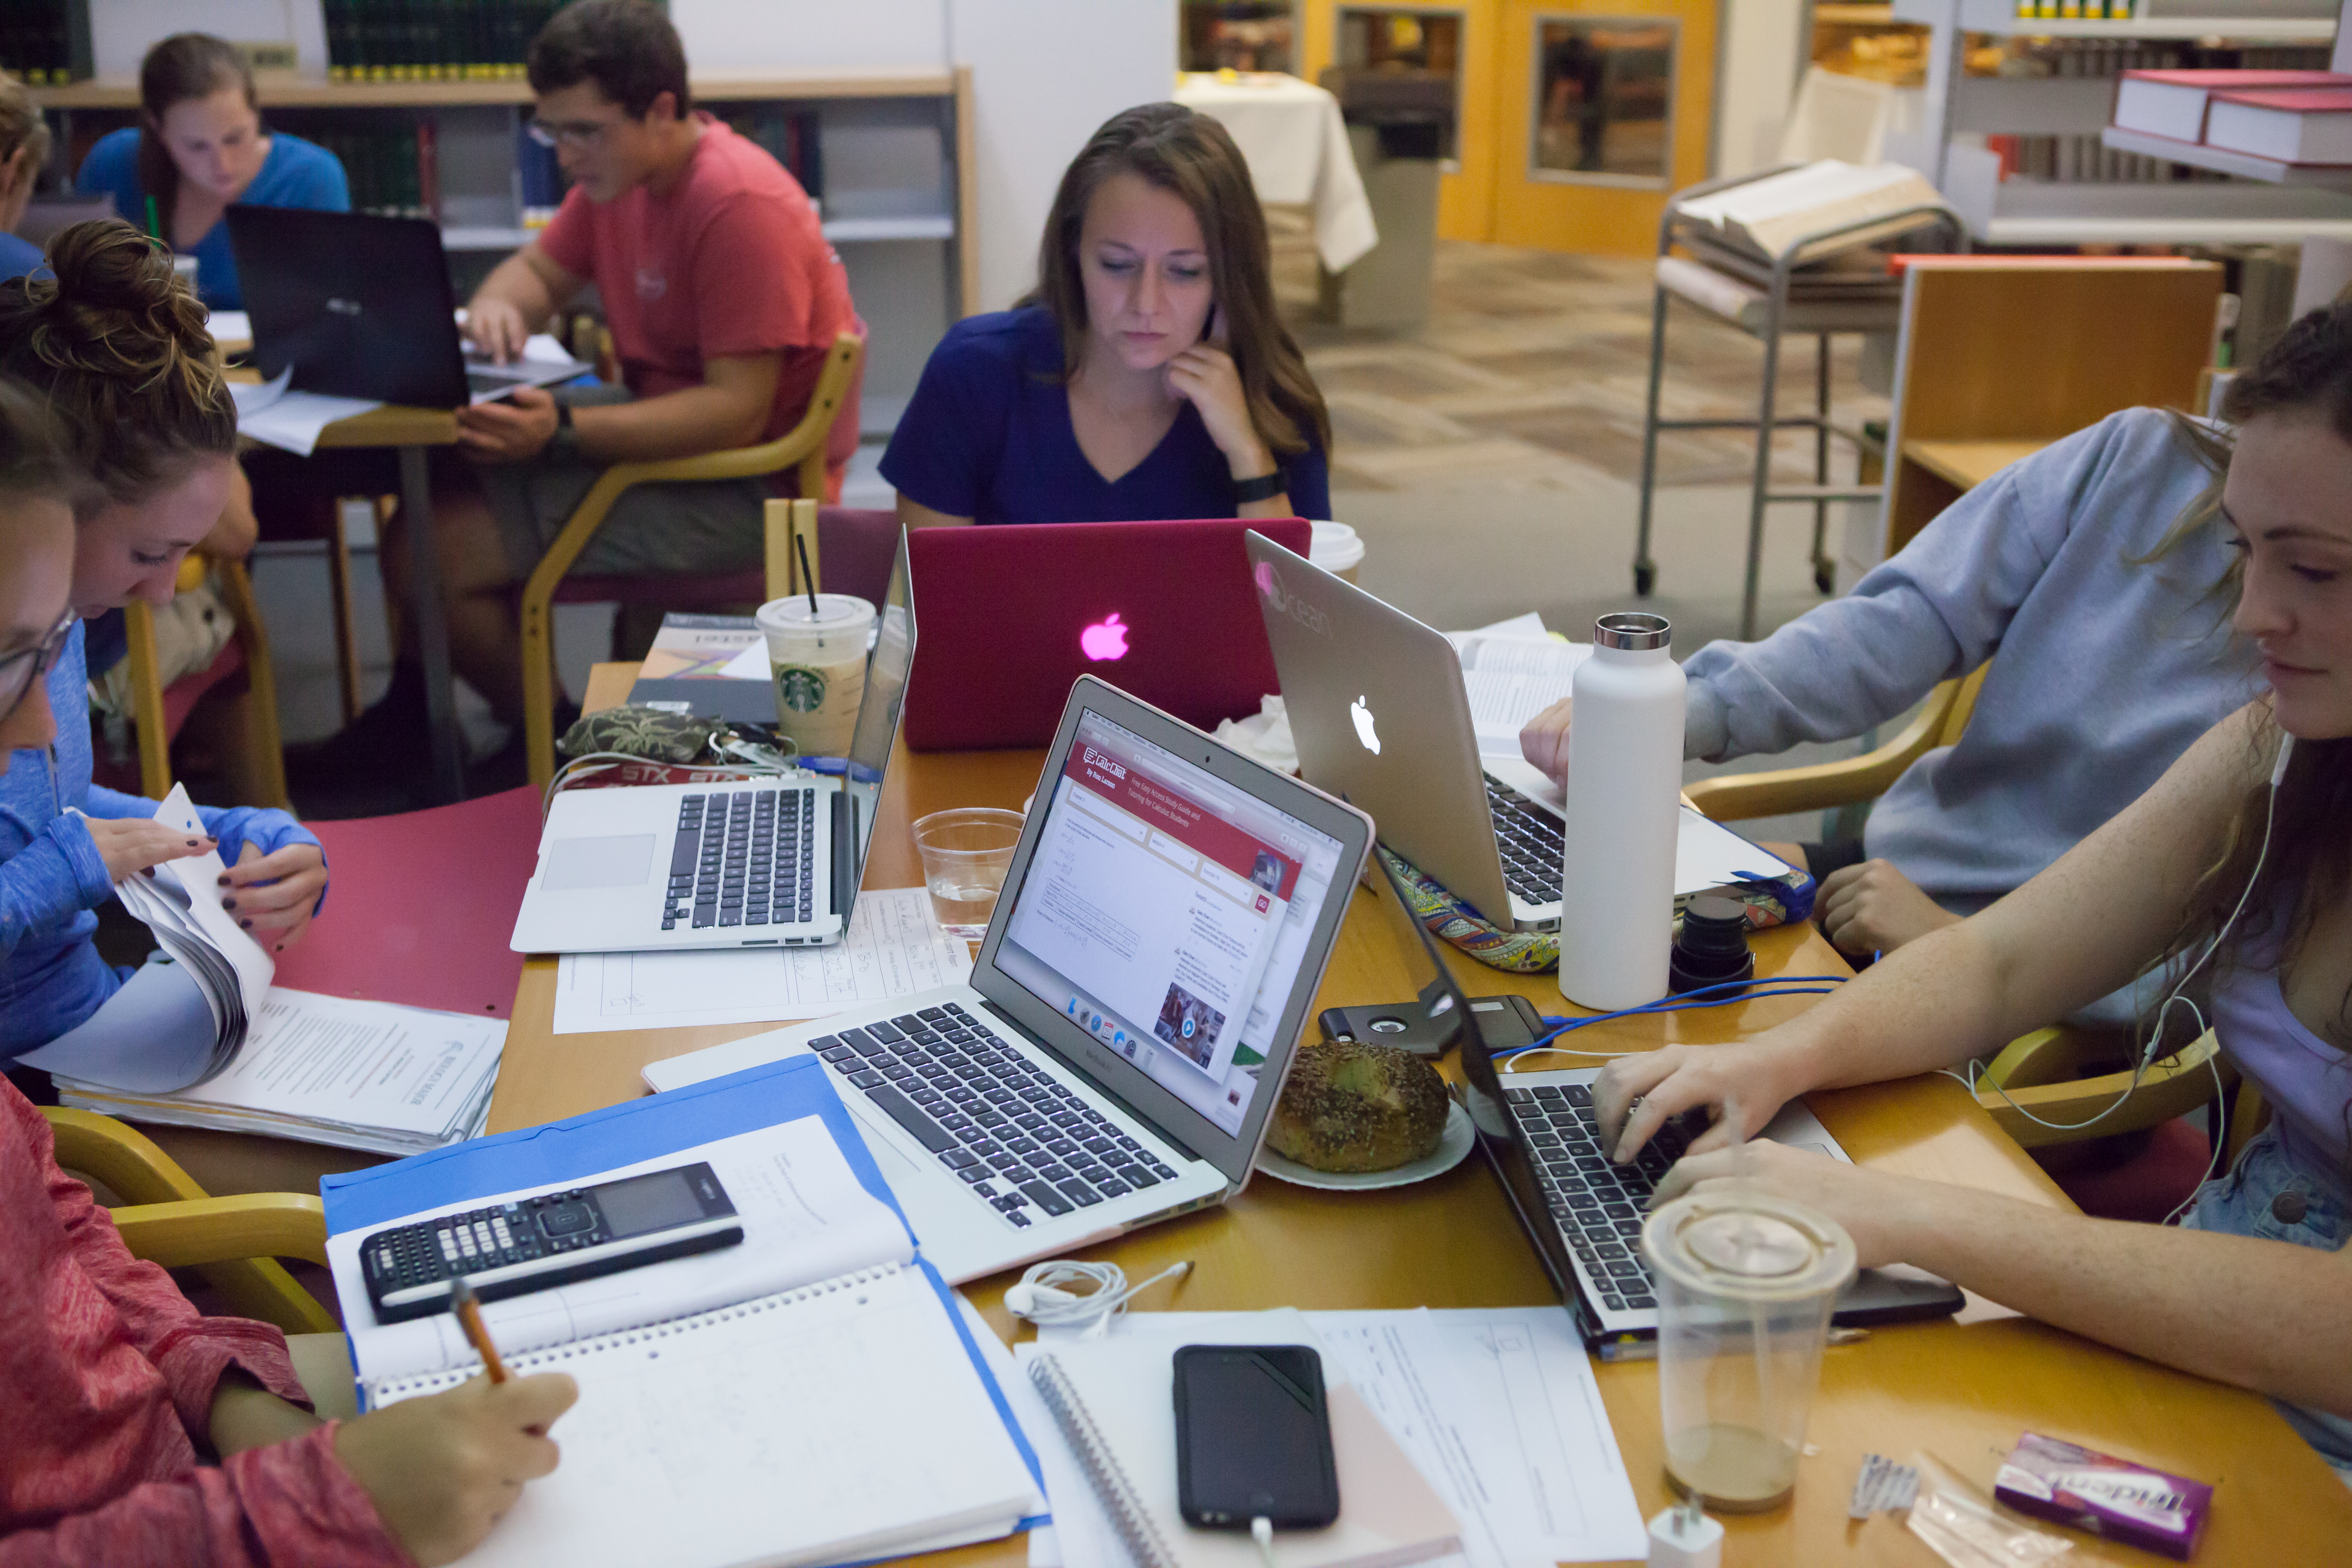 Bryn Athyn College students working on laptops in library